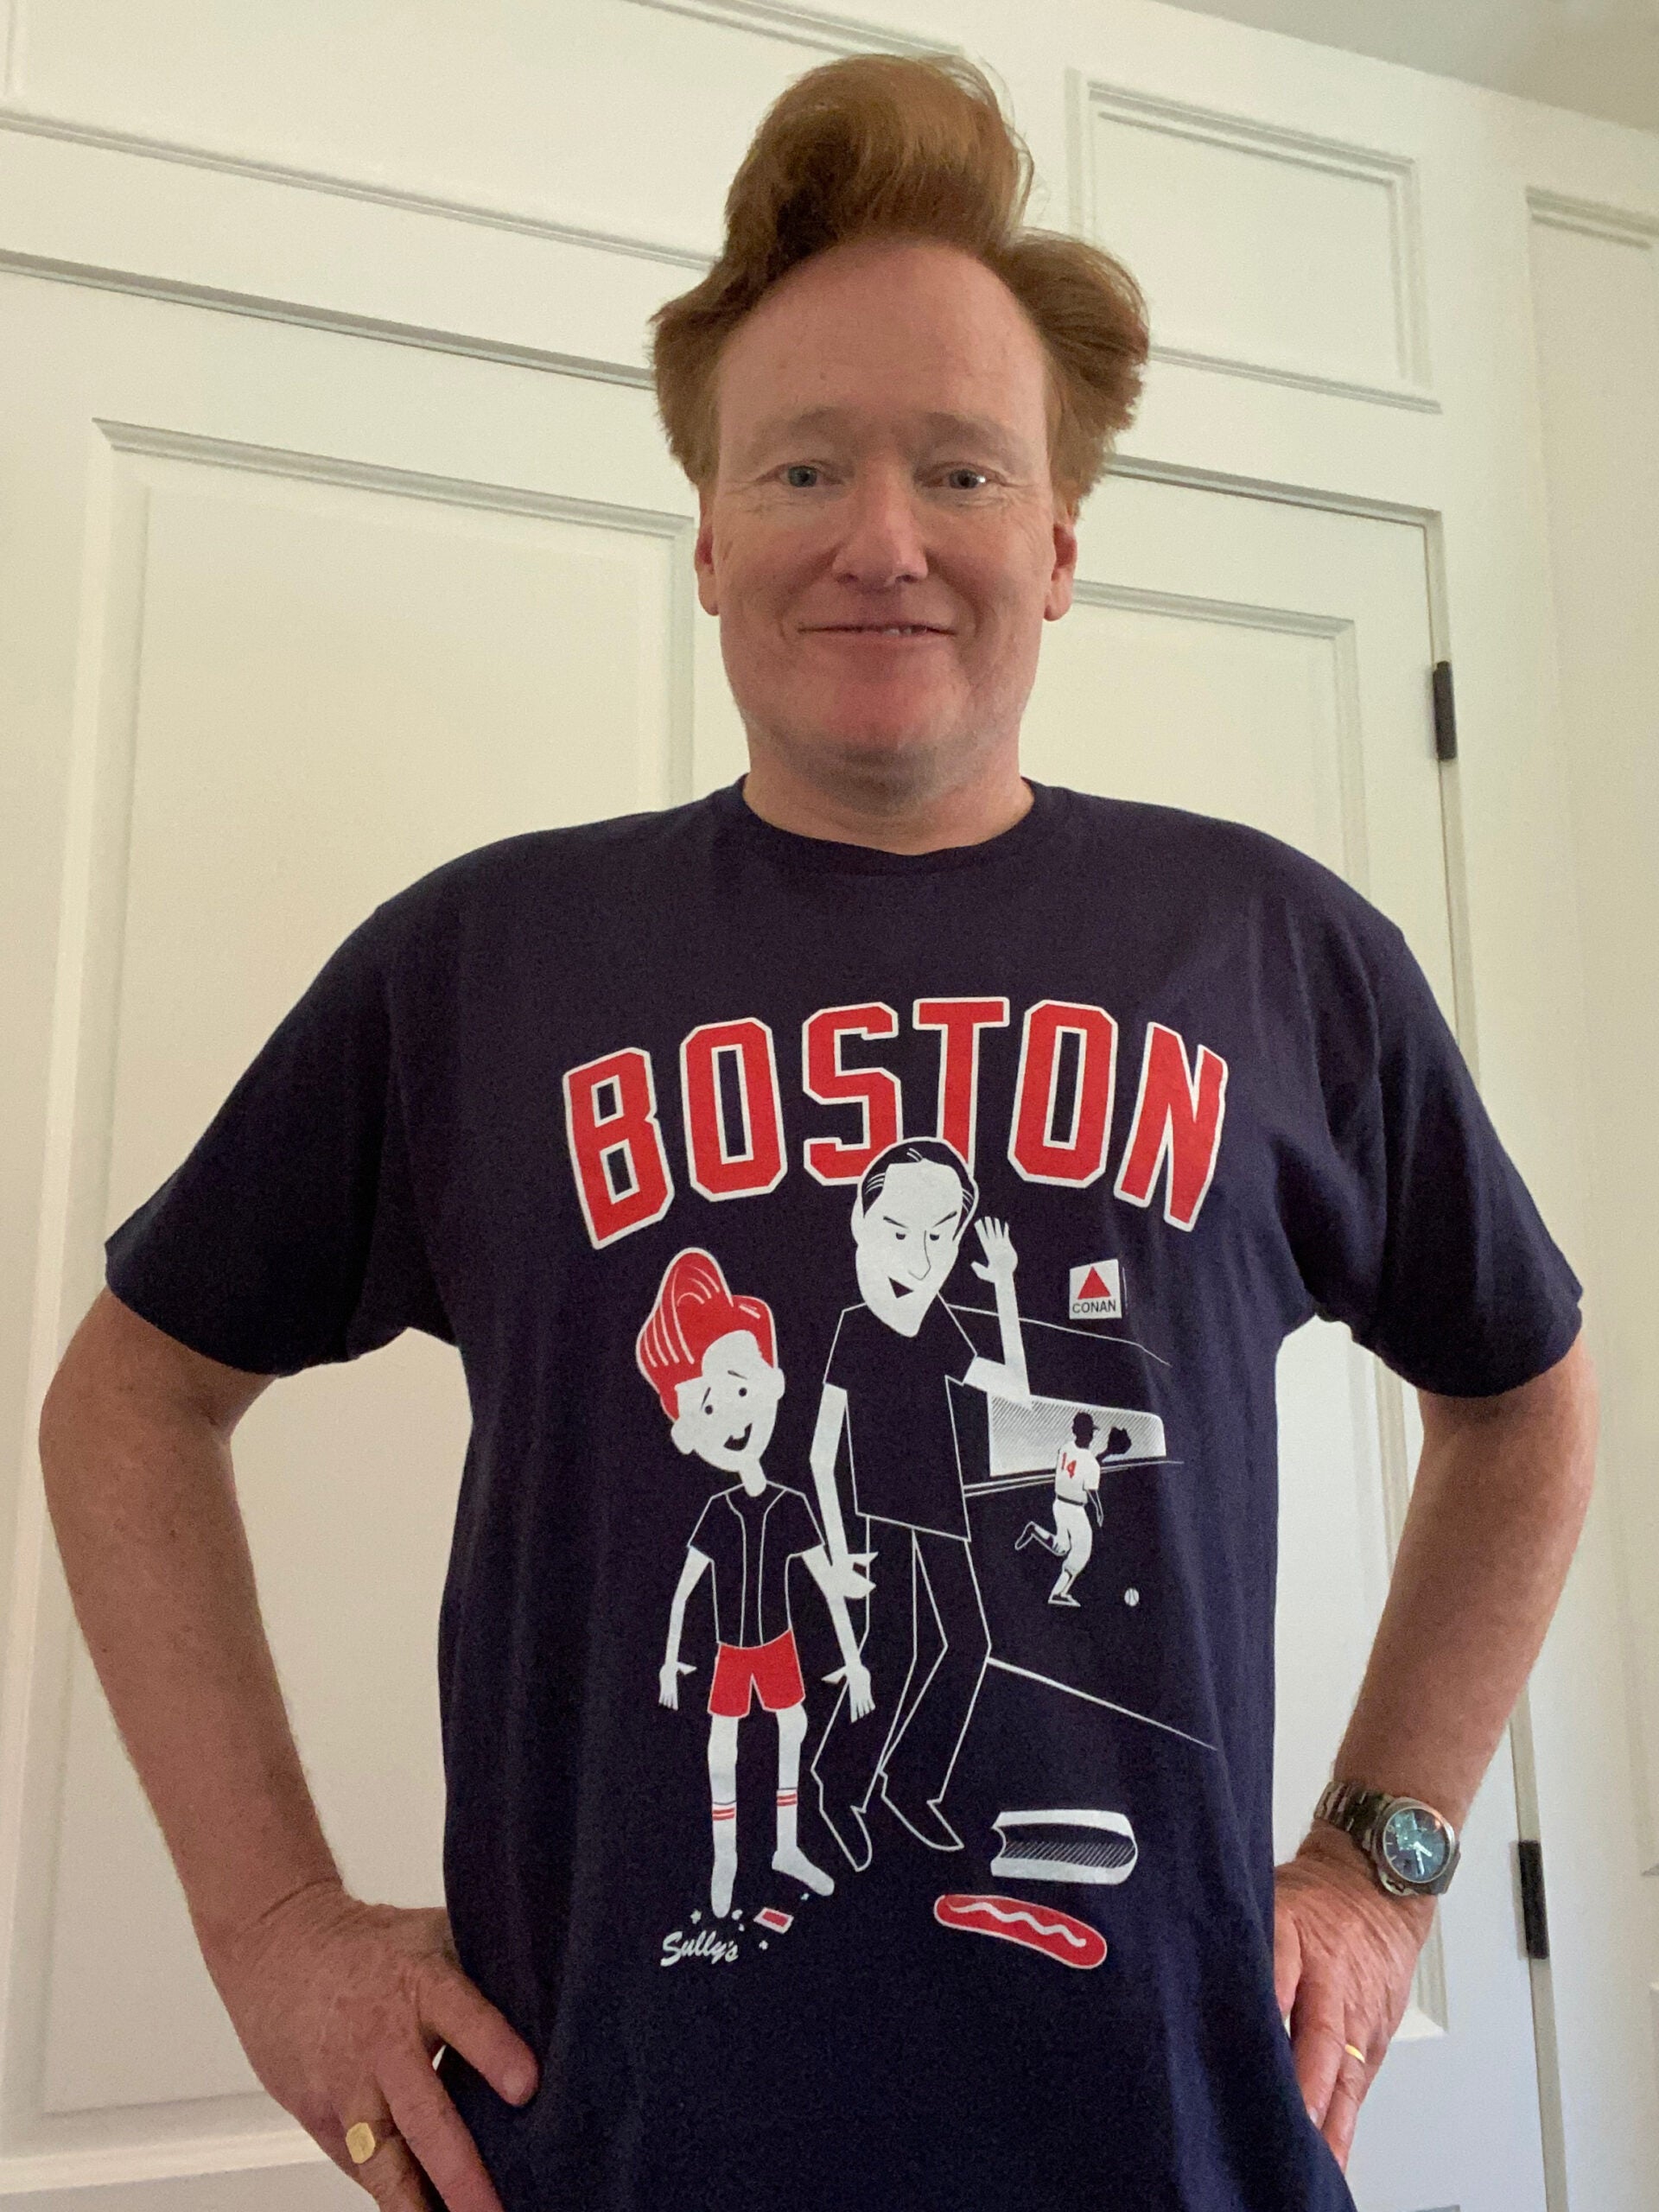 How a local designer got Conan O'Brien to wear 2 of his T-shirts on TV